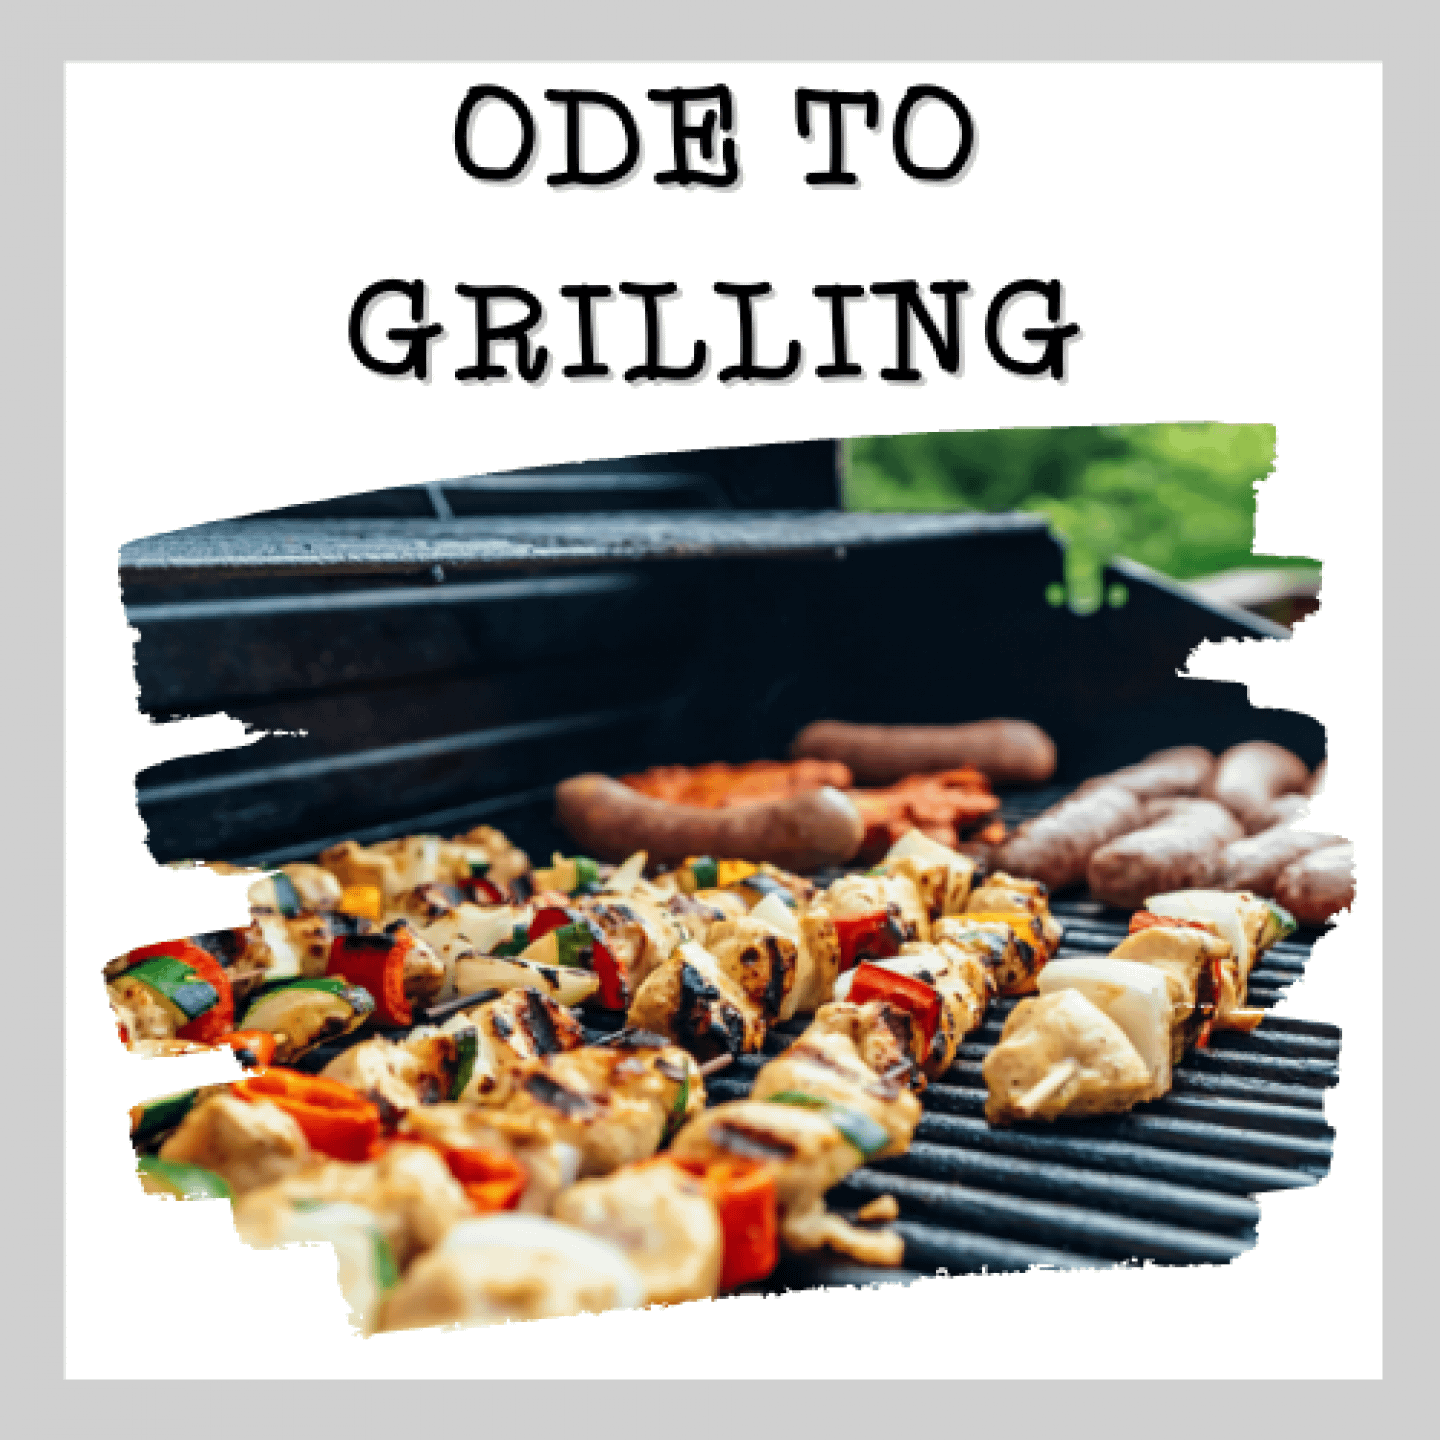 ODE-TO-GRILLING